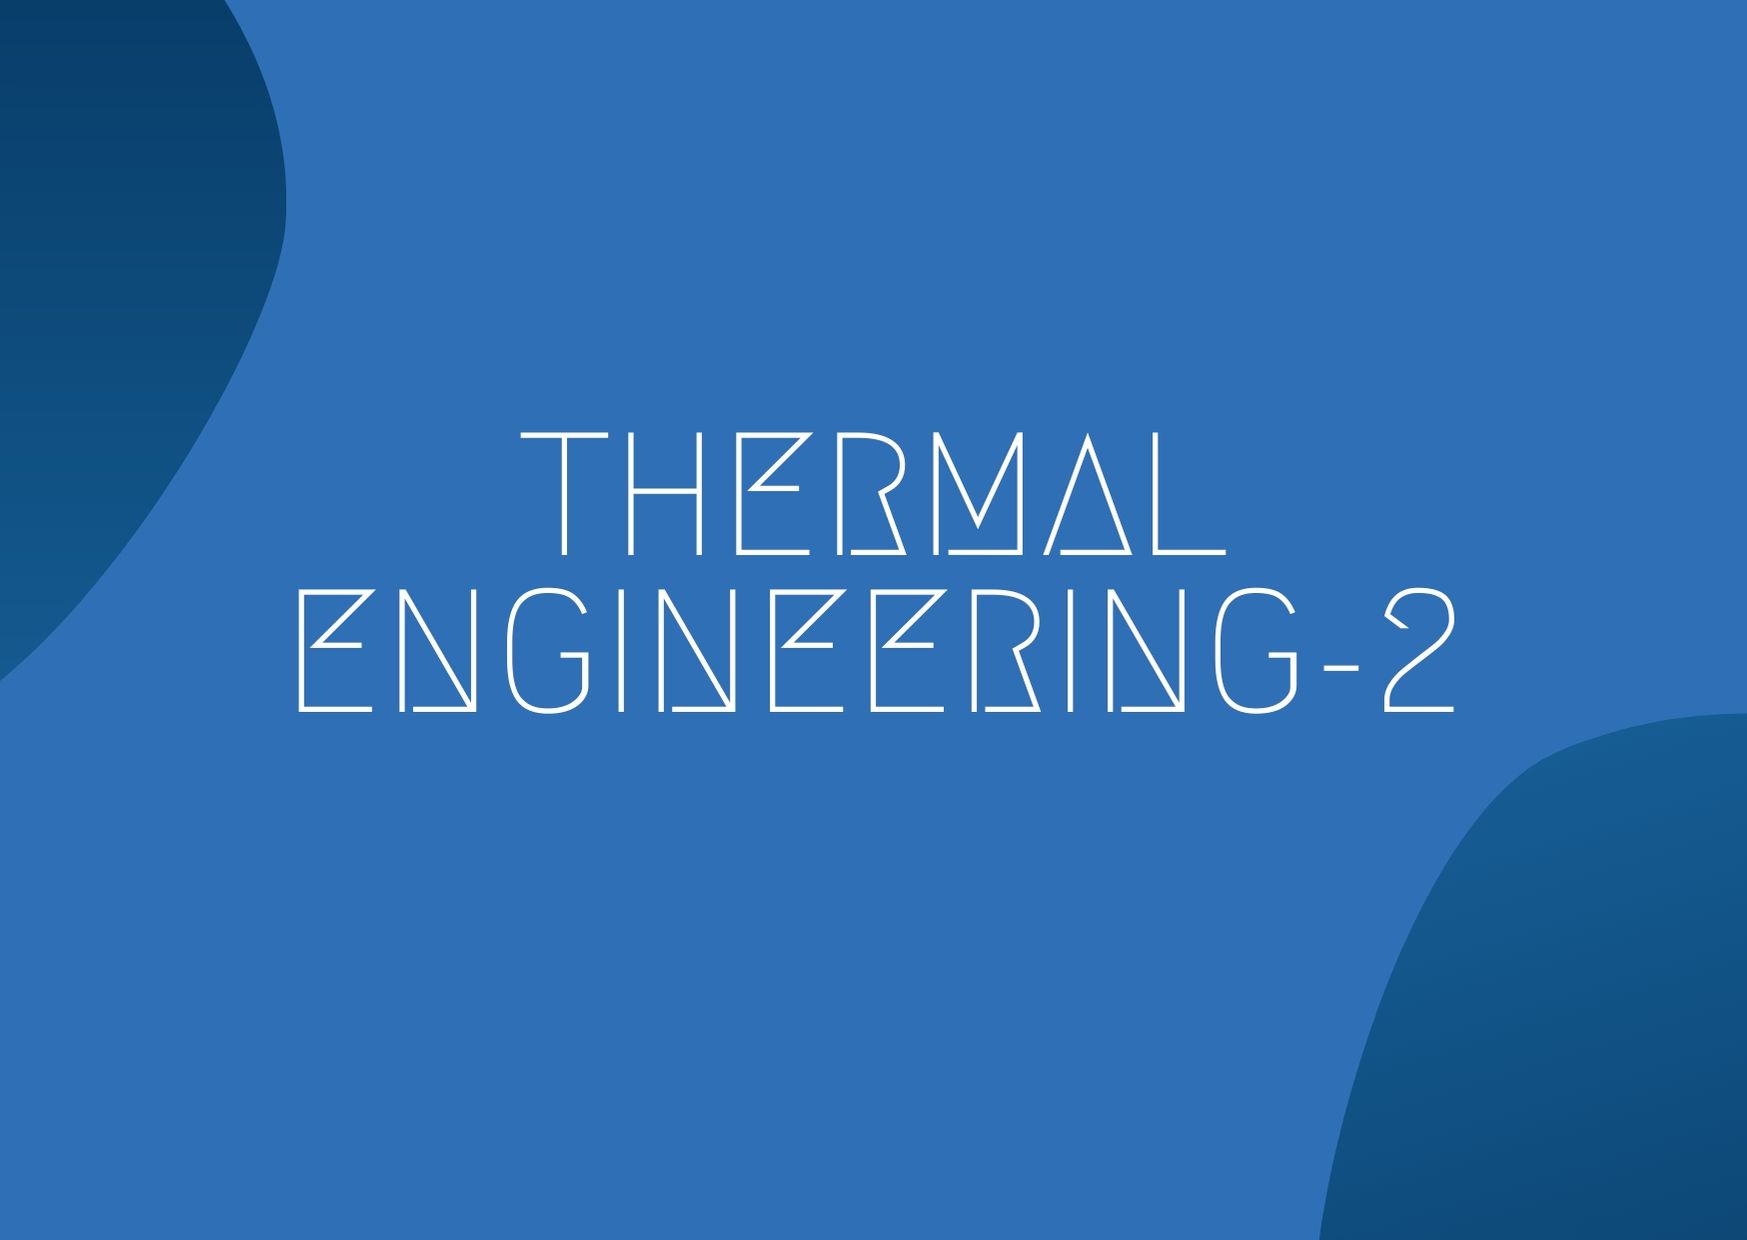 BTE Question Paper of Thermal Engineering-2